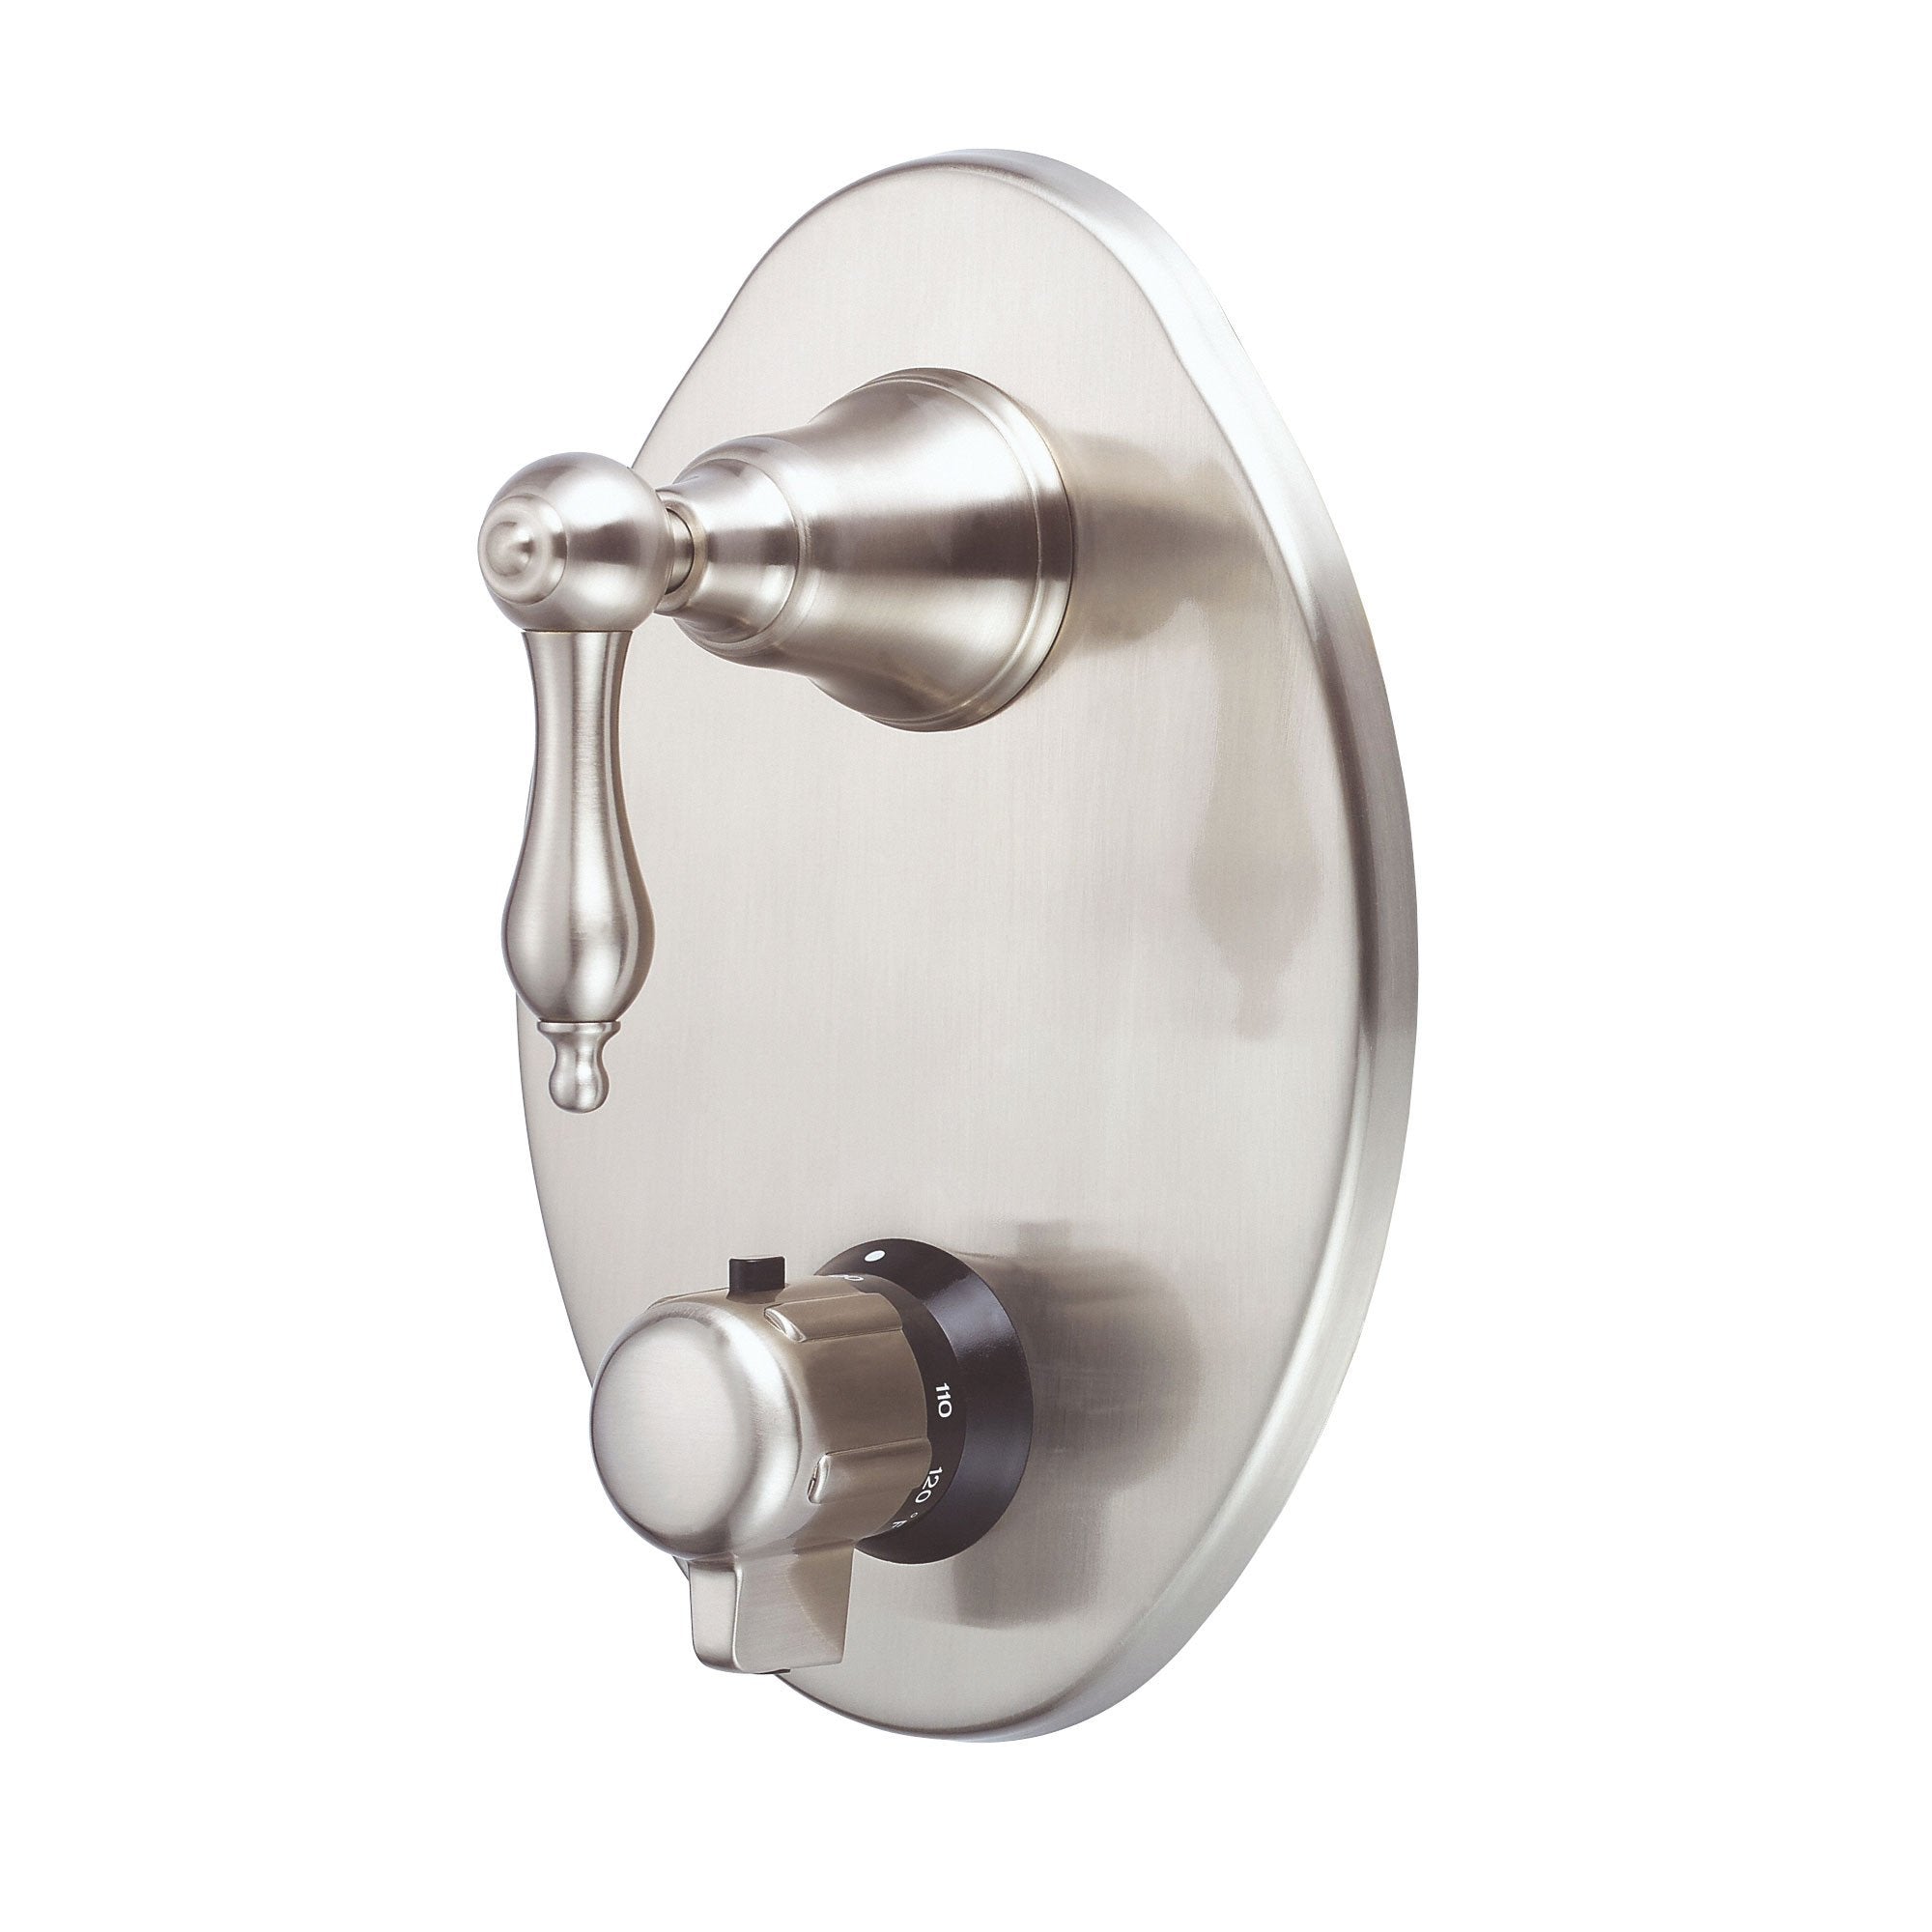 Danze Fairmont Brushed Nickel 1 2 Thermostatic Shower Faucet